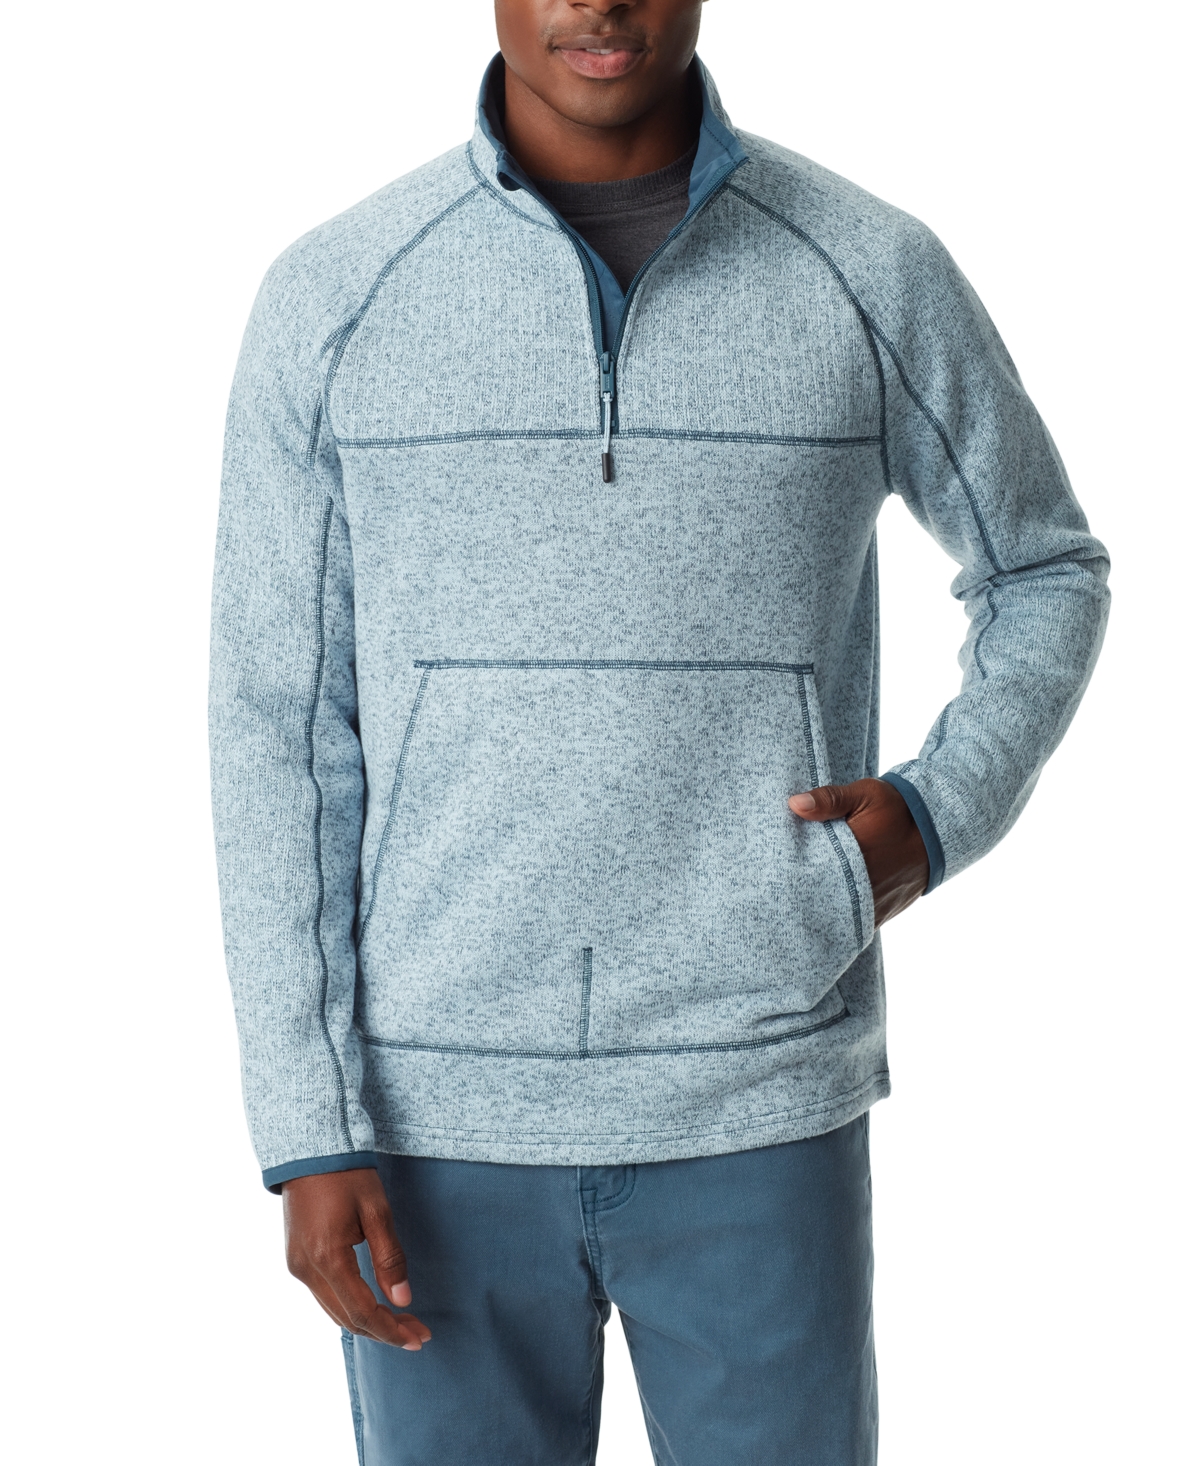 Men's Quarter-Zip Long Sleeve Pullover Sweater - Forged Iron